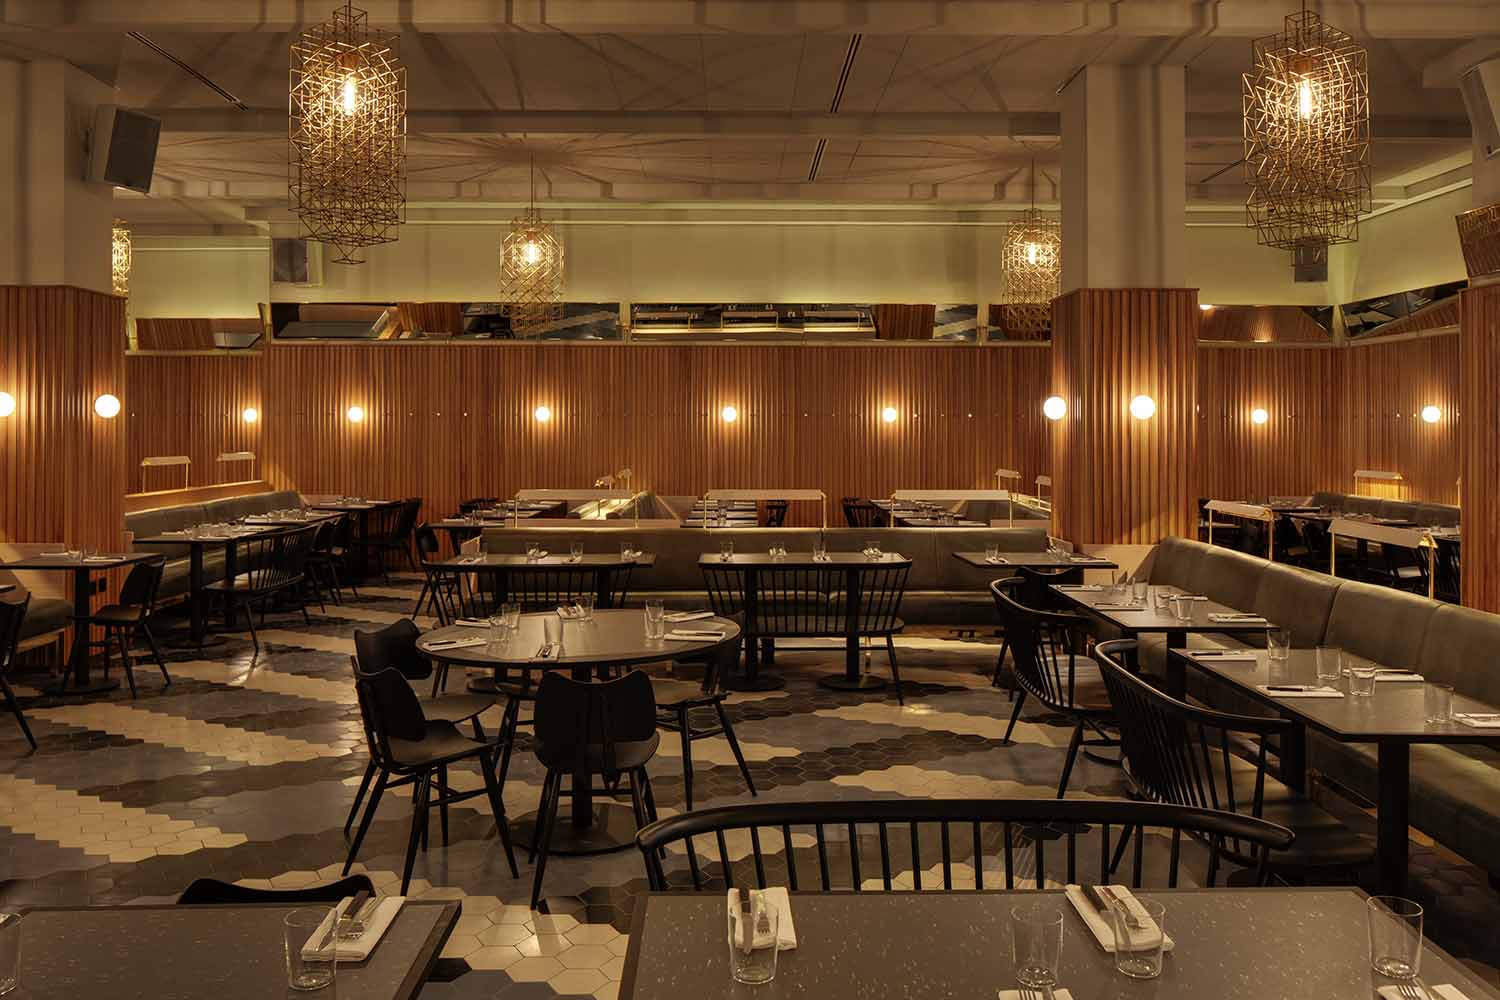 Bespoke restaurant furniture for The Ace Hotel